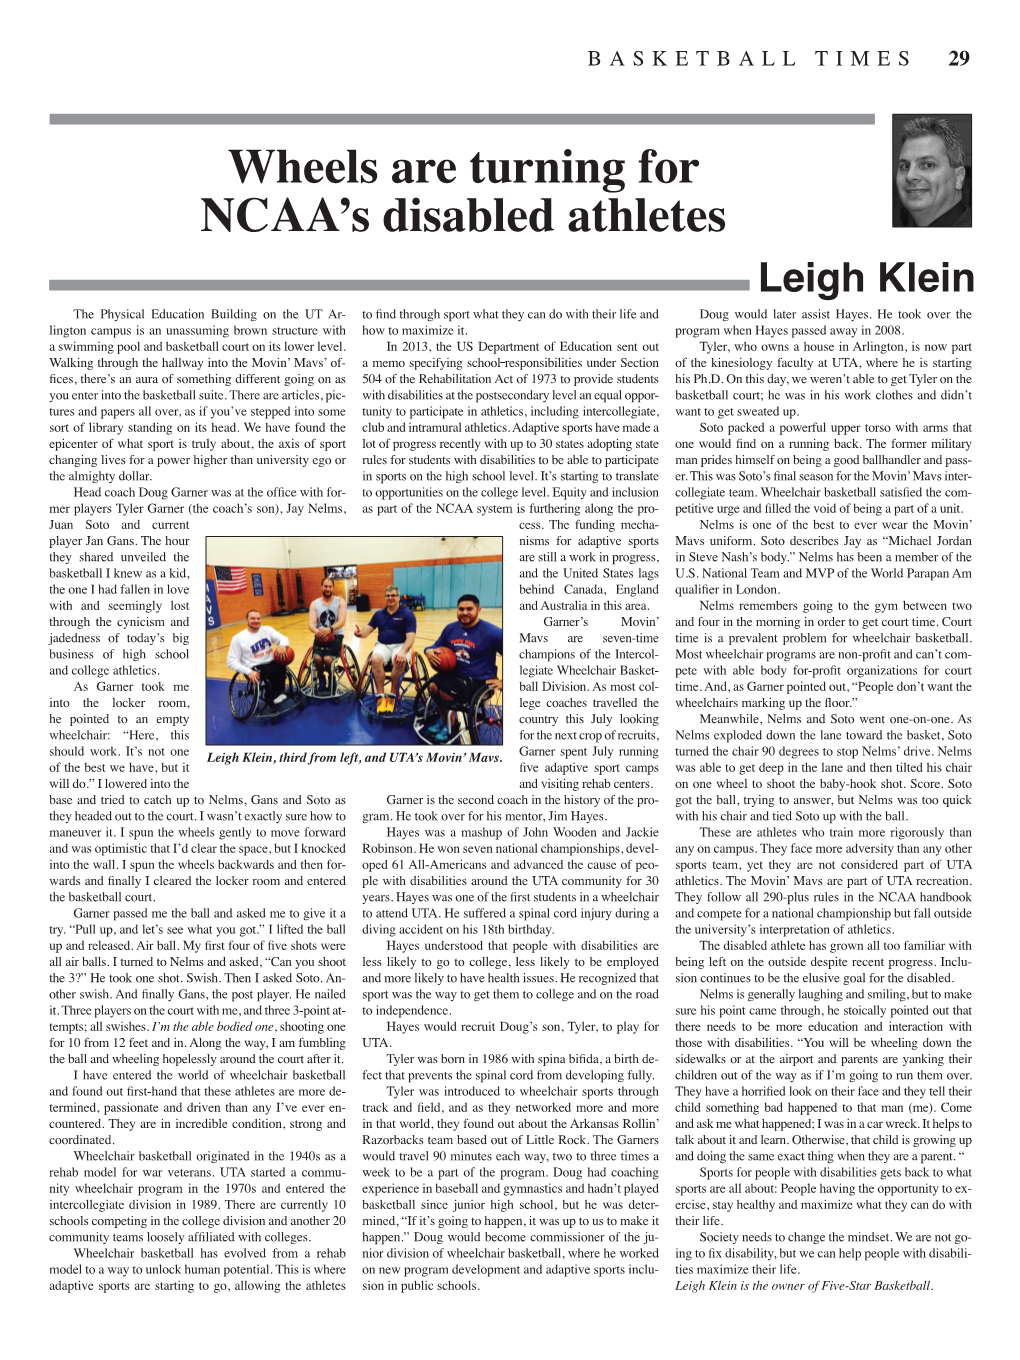 Wheels Are Turning for NCAA's Disabled Athletes